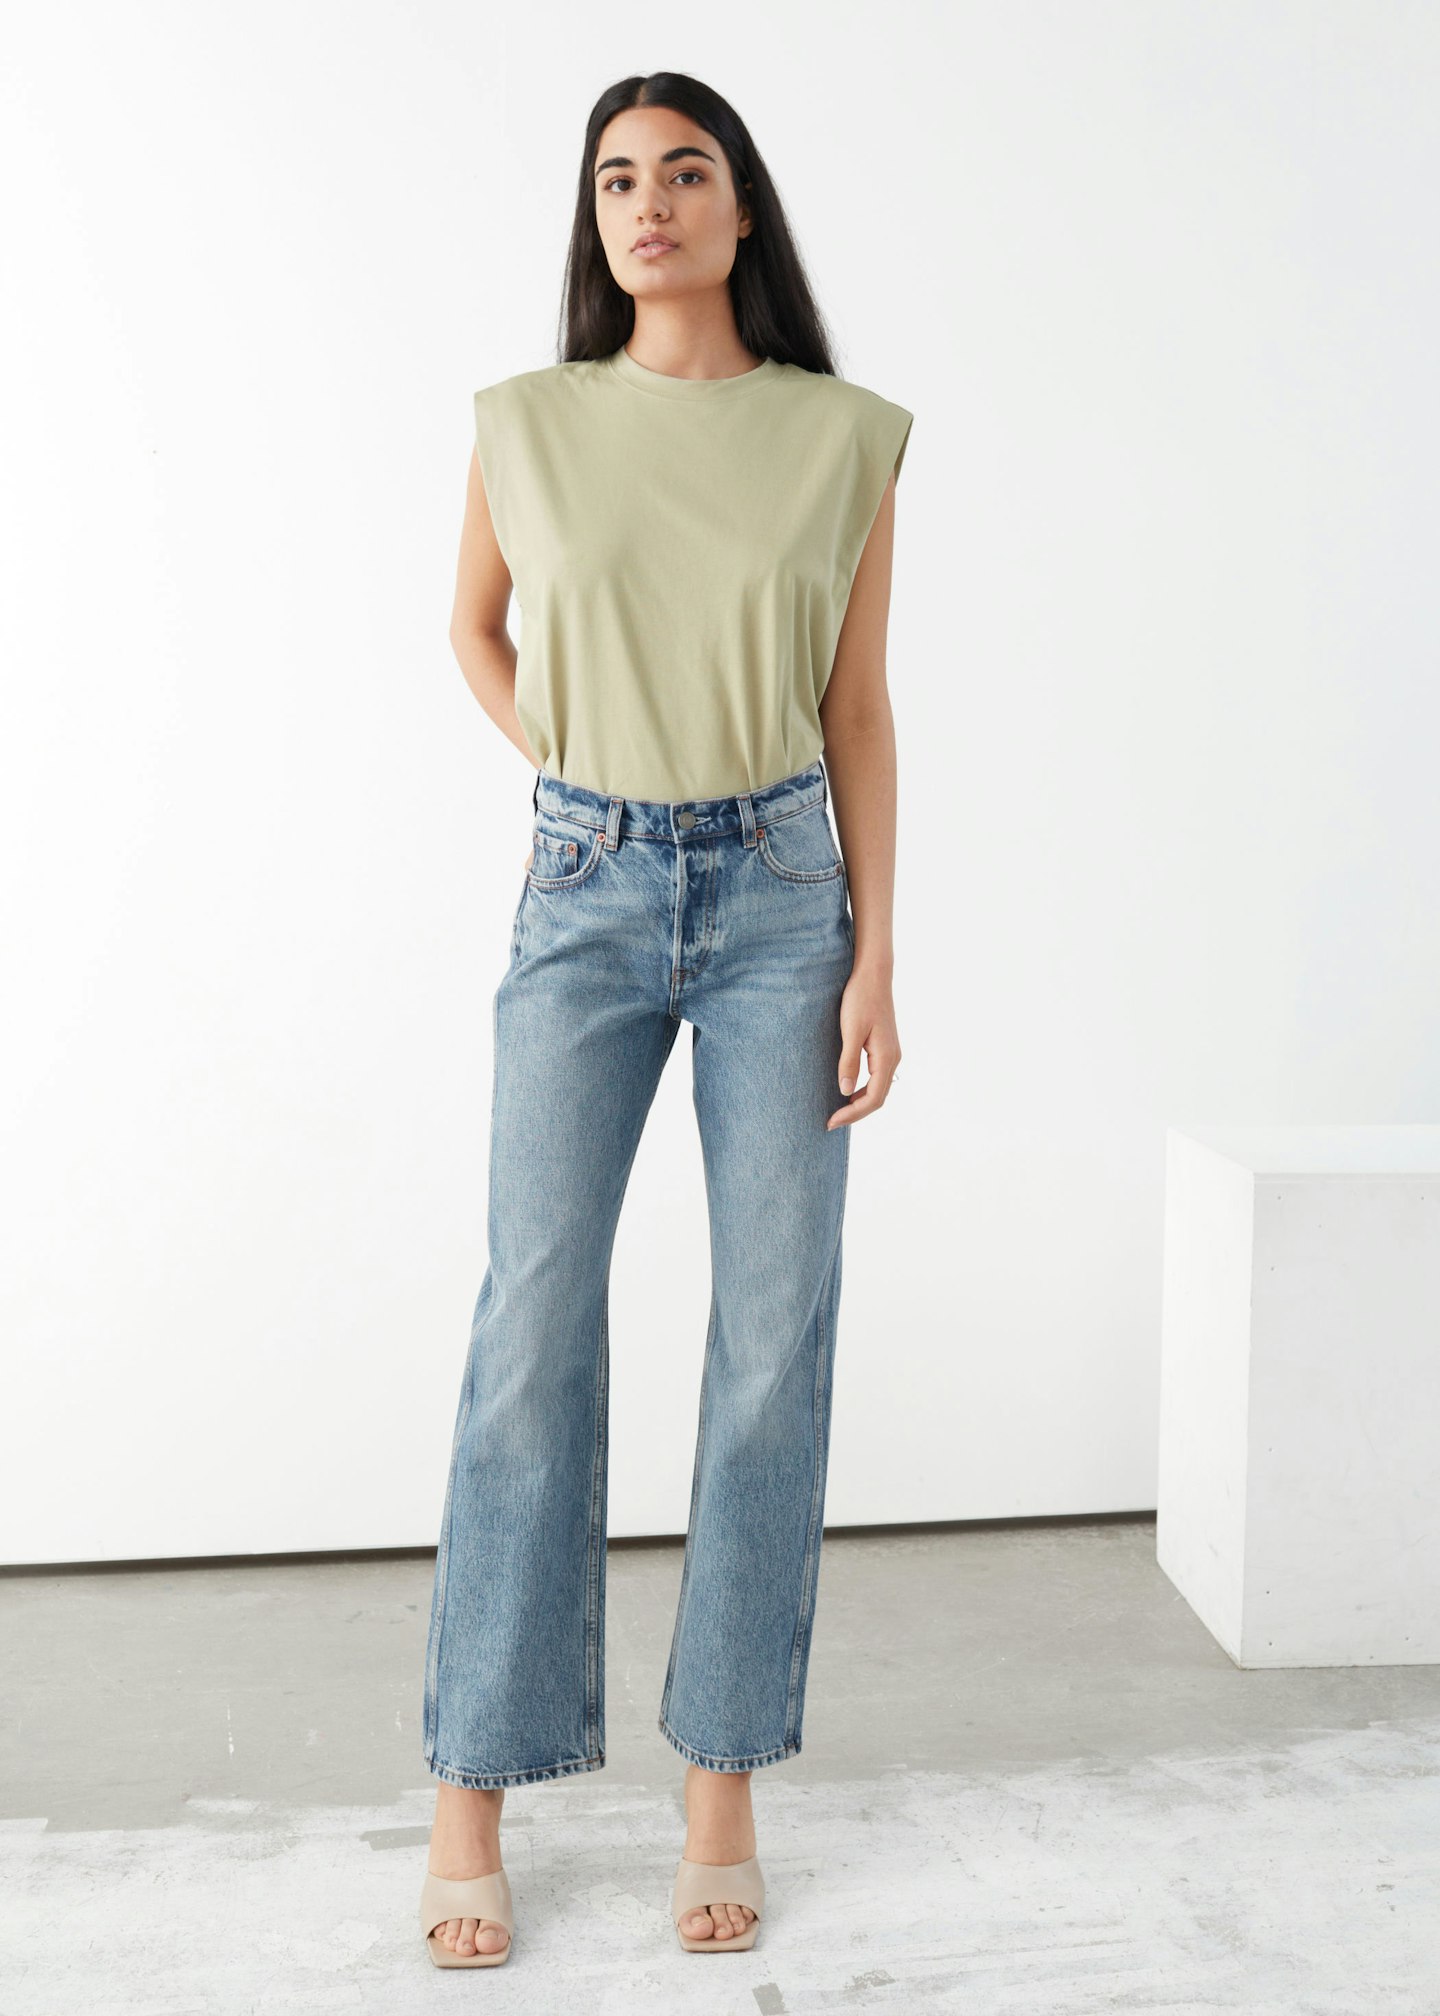 & Other Stories, Straight Mid-Rise Jeans, £65